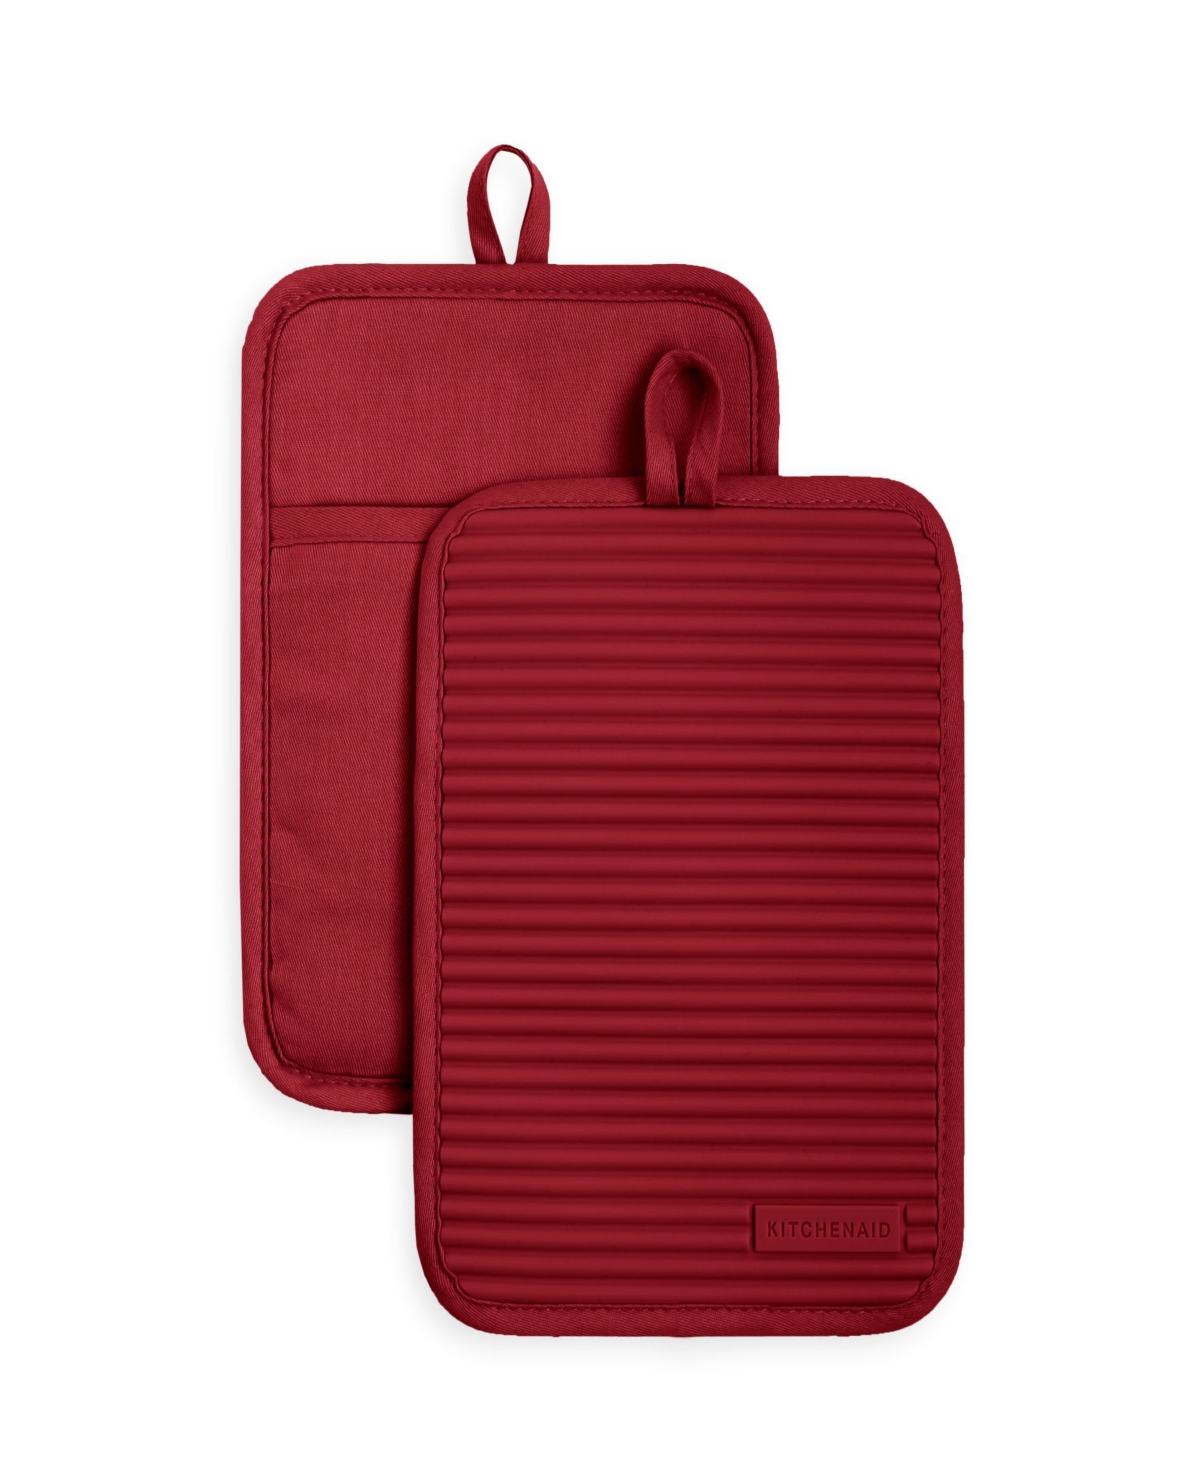 Ribbed Soft Silicone Pot Holder Set, 2 Piece - Red